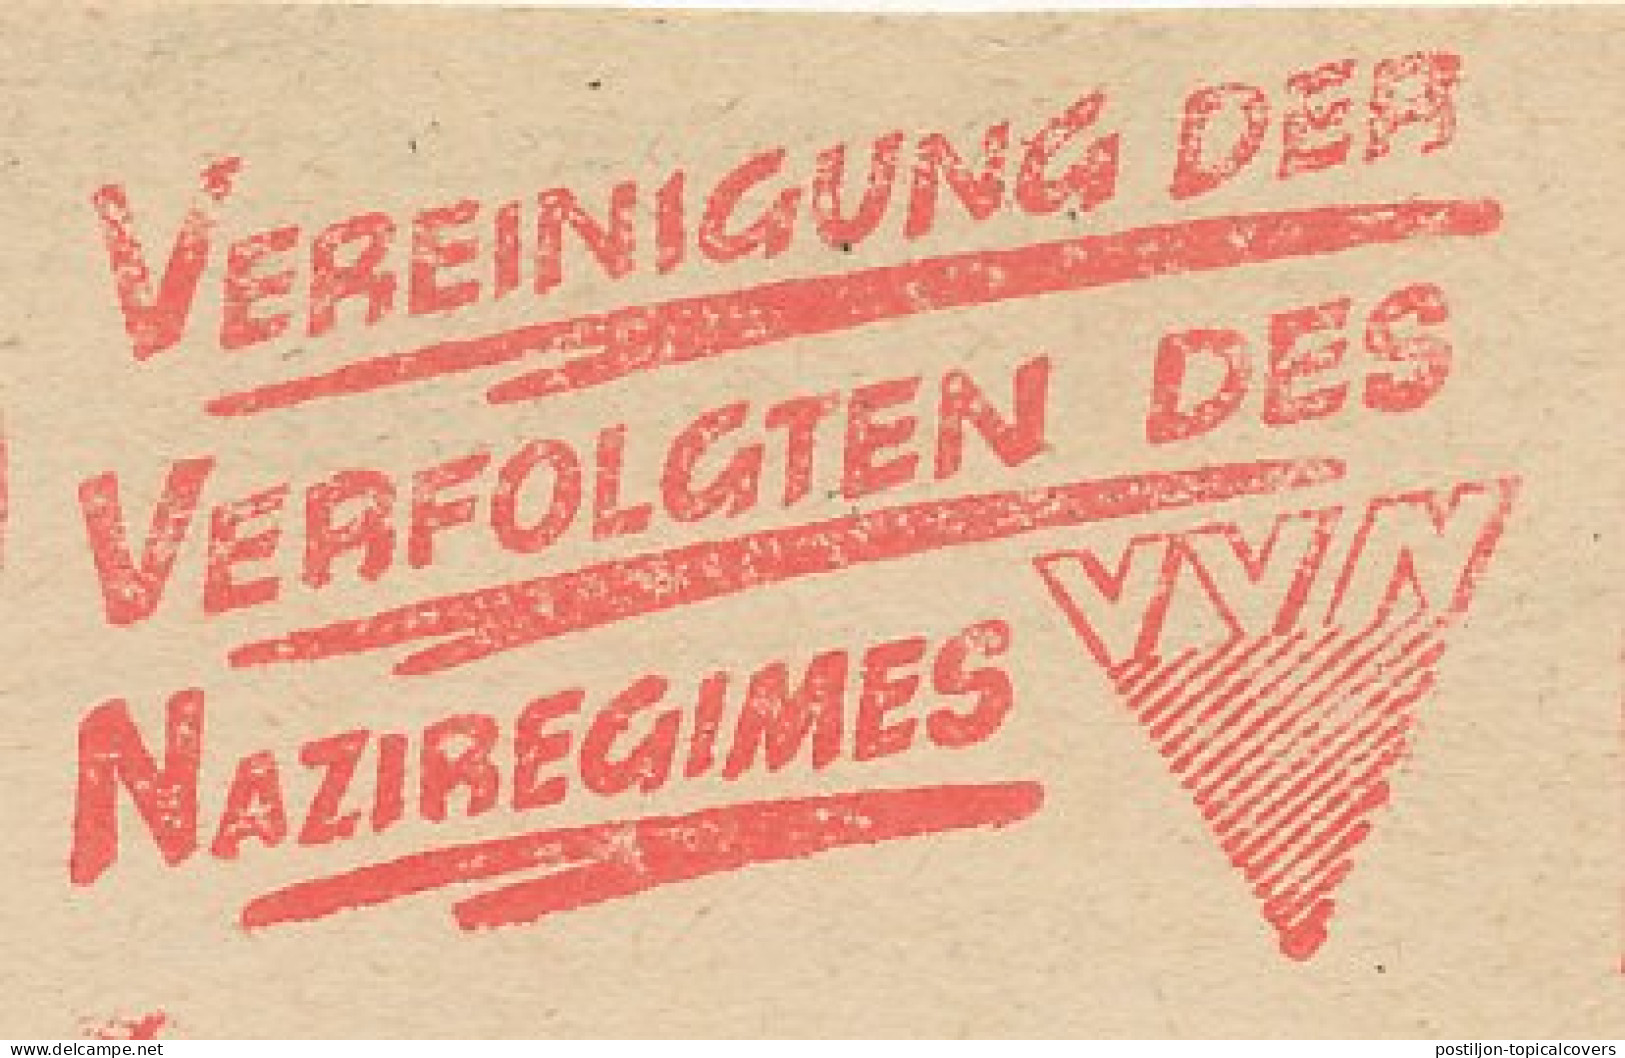 Meter Cut Deutsche Post / Germany 1949 The Association Of Persecutees Of The Nazi Regime - VVN - Ohne Zuordnung